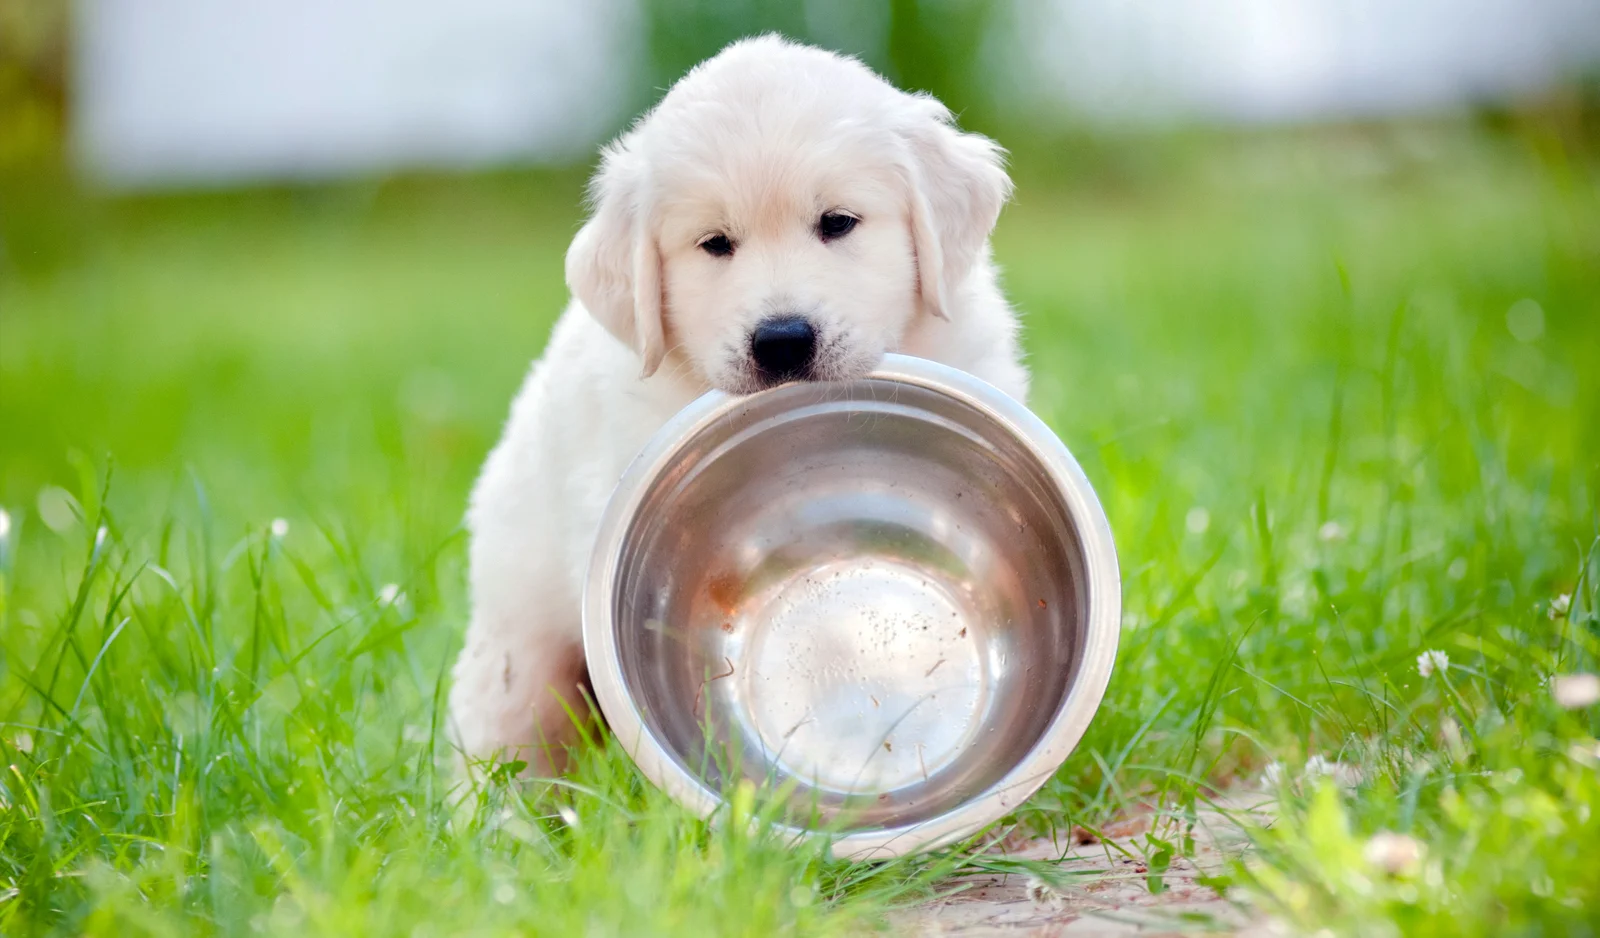 A puppy with an empty bowl